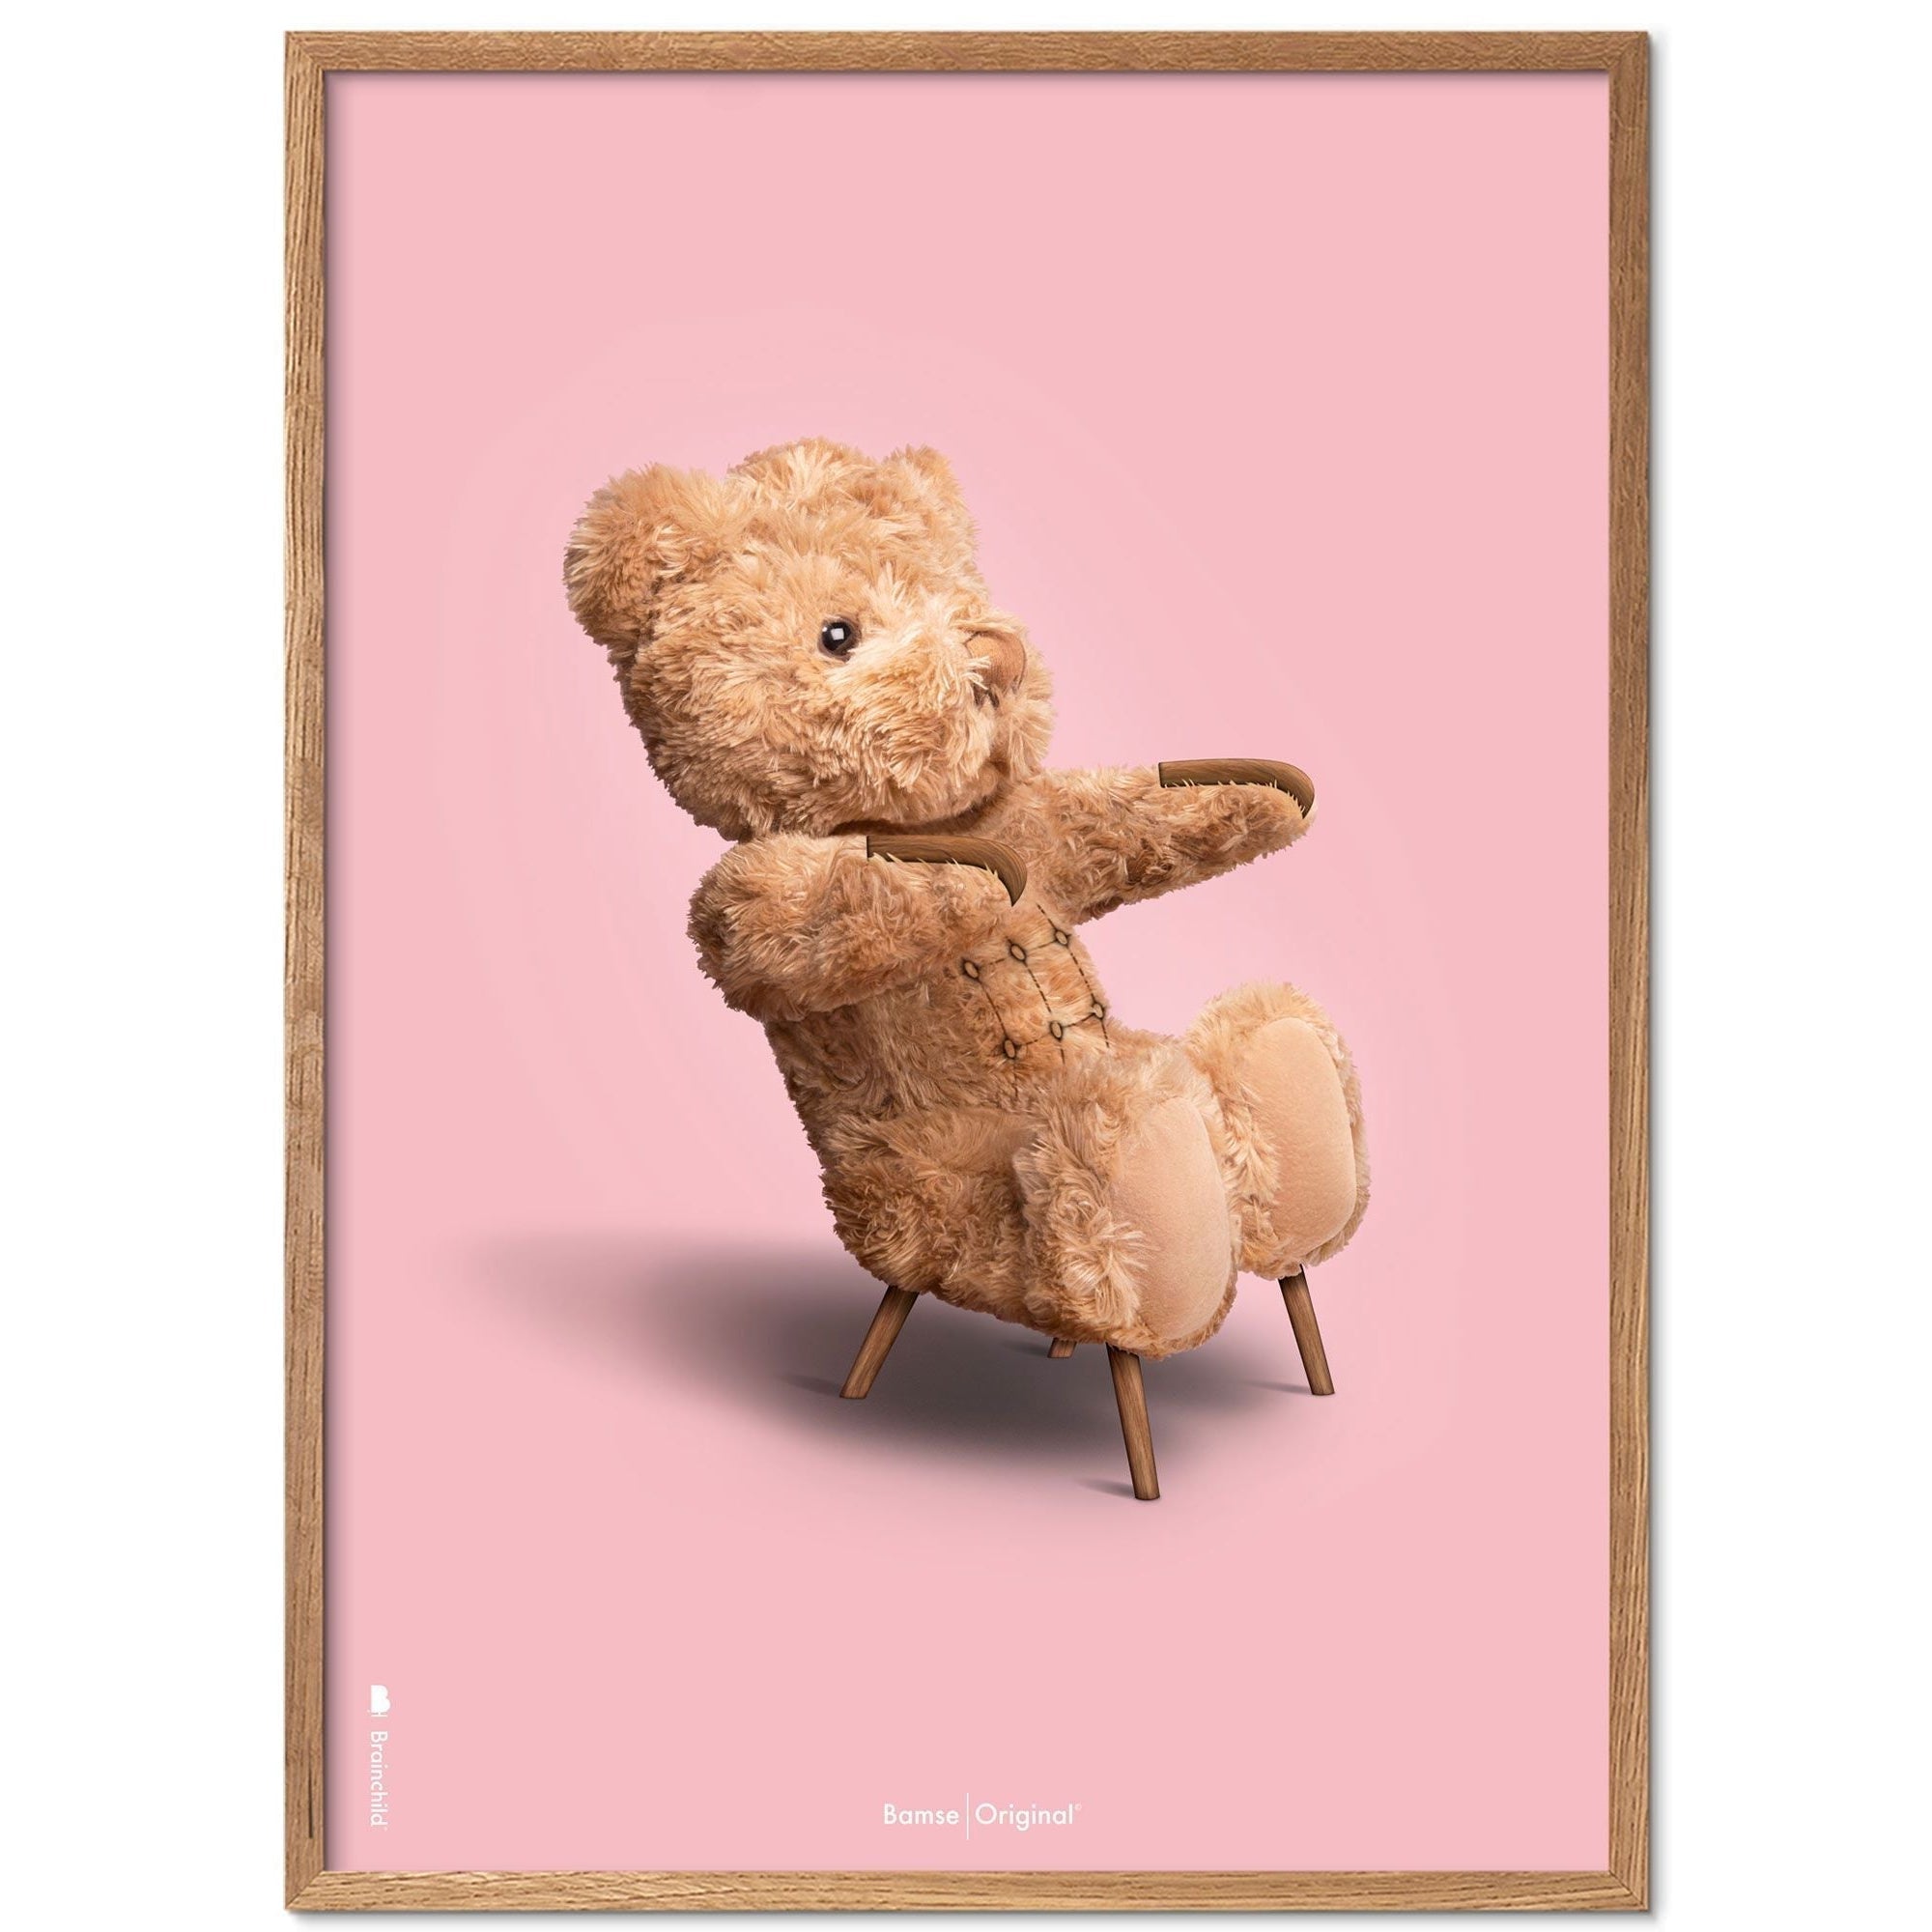 Brainchild Teddy Bear Classic Poster Frame Made Of Light Wood Ramme 30x40 Cm, Pink Background